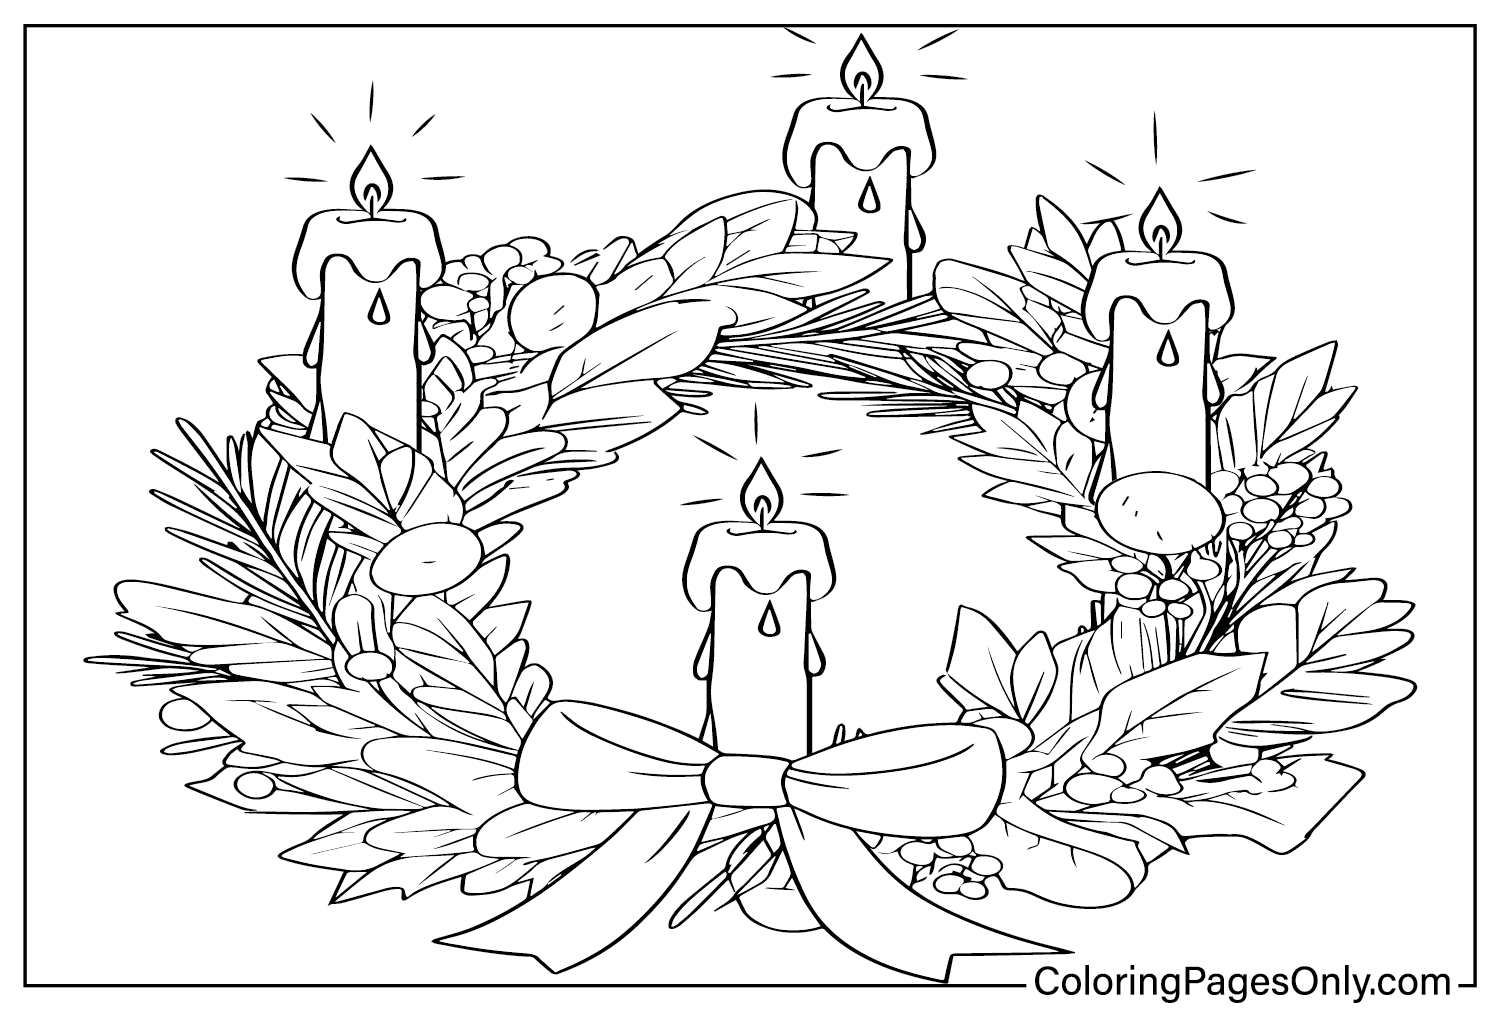 Advent Wreath Coloring Page PDF - Free Printable Coloring Pages